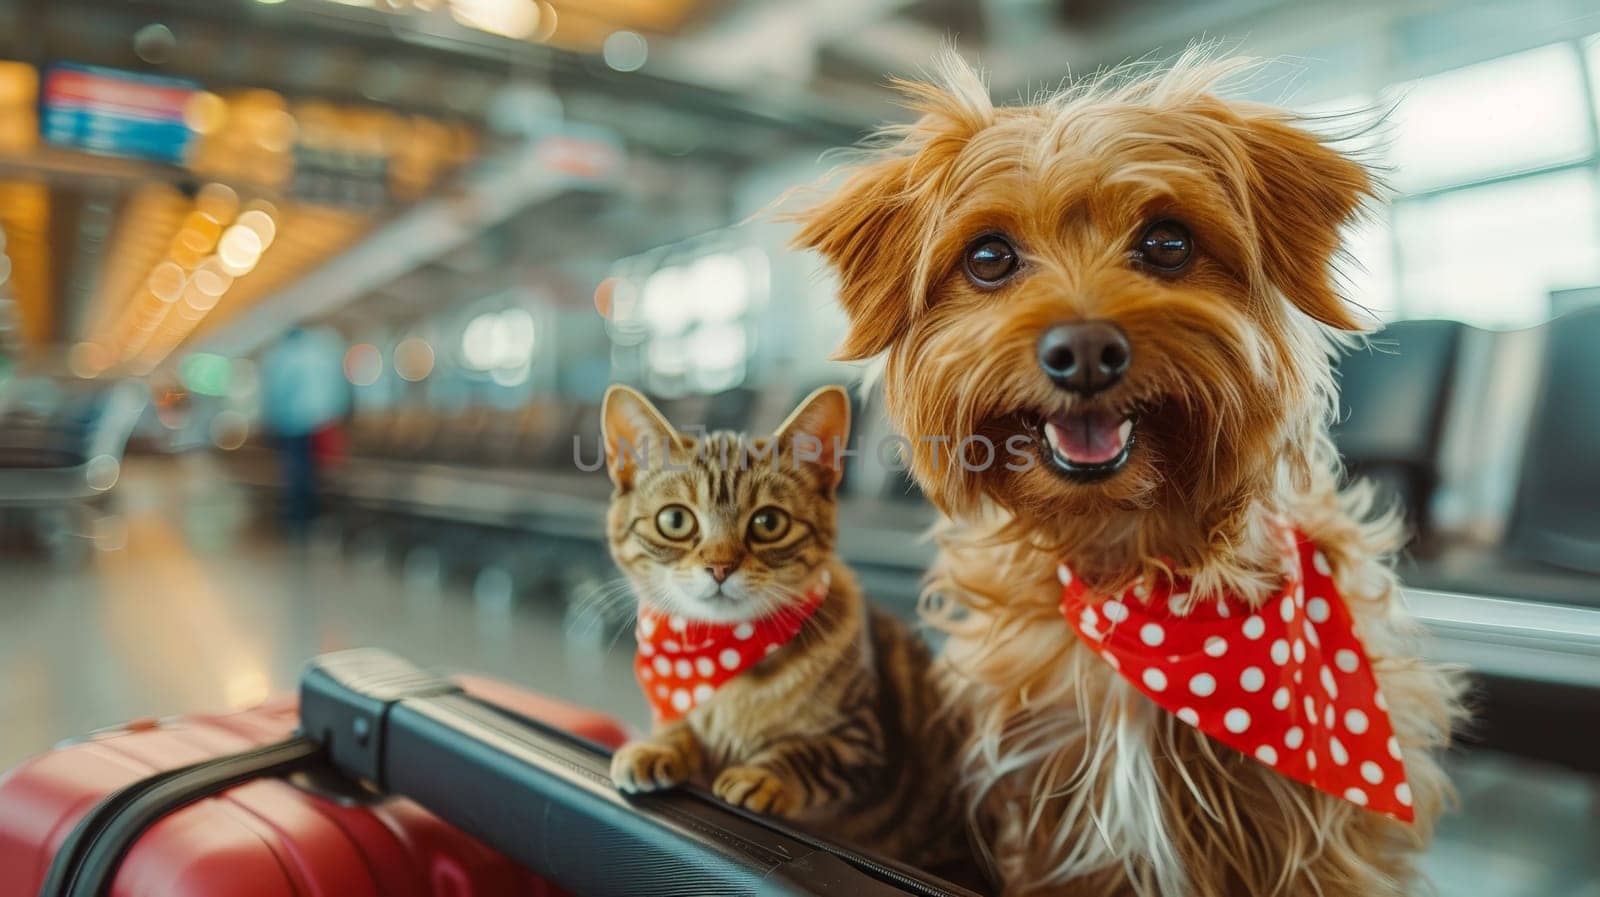 Traveling Pets, Dog and Cat Together at the Airport, Adorable and Heartwarming Design.